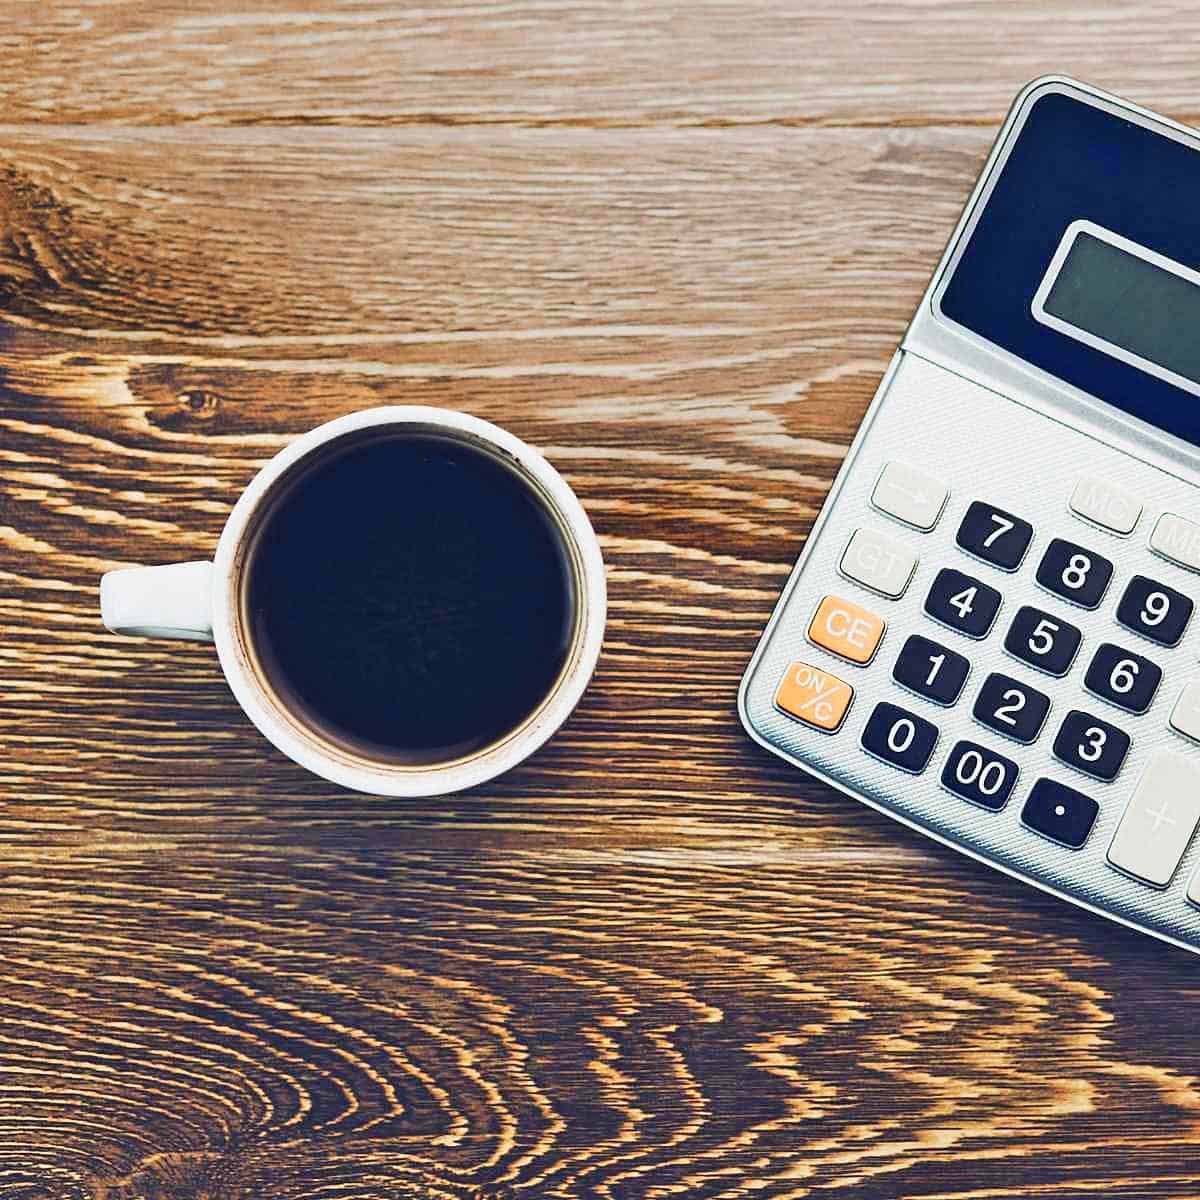 A cup of coffee in a white mug and a calculator on a wood desk.